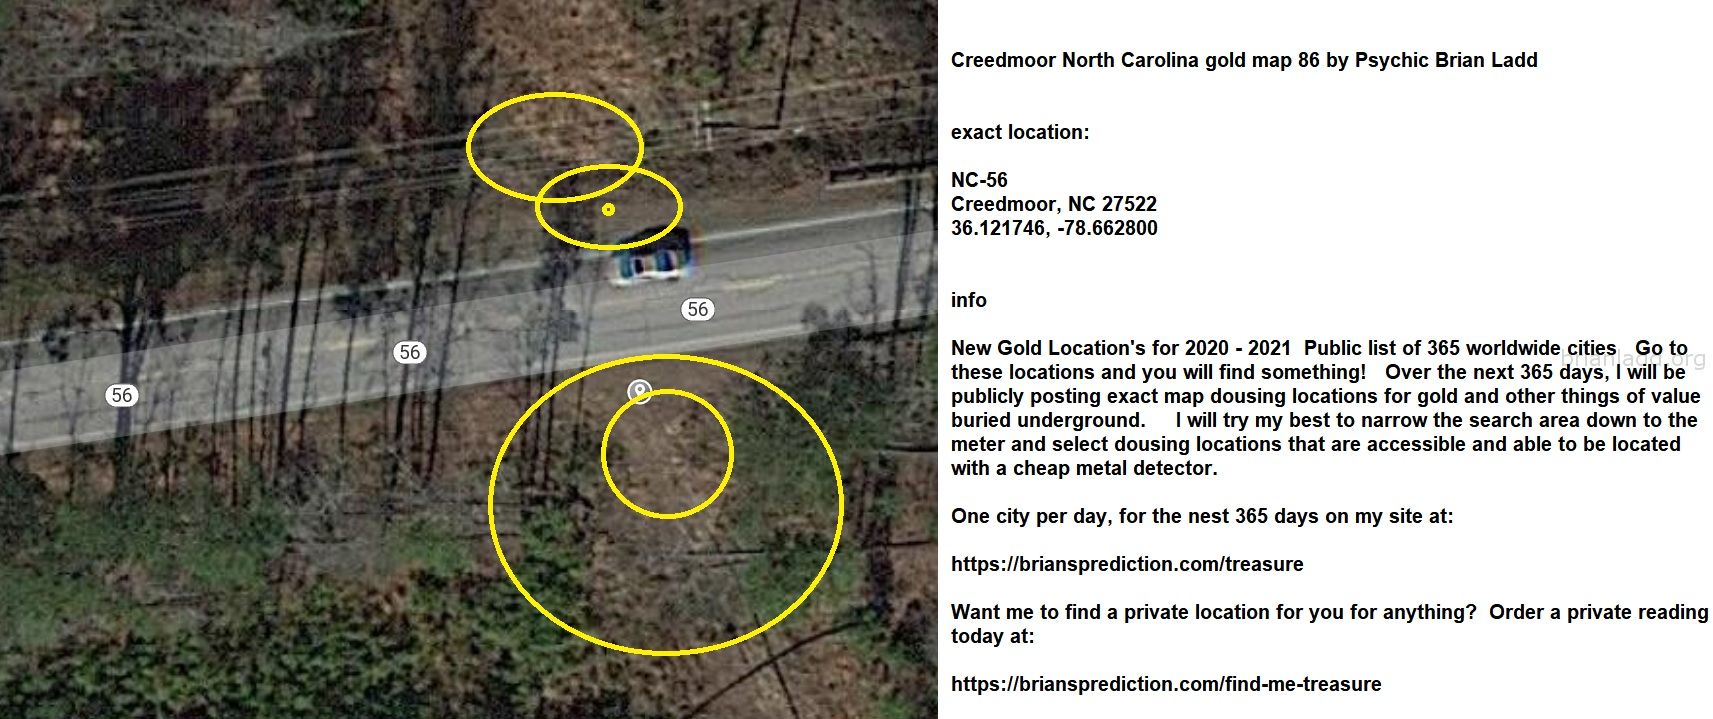 Creedmoor North Carolina Gold Map 86 By Psychic Brian Ladd - Crofton Maryland Gold Map 87 By Psychic Brian Ladd  Exact L...
Crofton Maryland Gold Map 87 By Psychic Brian Ladd  Exact Location:  Crofton  Maryland  39.009866, -76.697764  Info  New Gold Location'S For 2020 - 2021  Public List Of 365 Worldwide Cities  Go To These Locations And You Will Find Something!  Over The Next 365 Days, I Will Be Publicly Posting Exact Map Dousing Locations For Gold And Other Things Of Value Buried Underground.  I Will Try My Best To Narrow The Search Area Down To The Meter And Select Dousing Locations That Are Accessible And Able To Be Located With A Cheap Metal Detector.  One City Per Day, For The Nest 365 Days On My Site At:   https://briansprediction.com/Treasure  Want Me To Find A Private Location For You For Anything?  Order A Private Reading Today At:   https://briansprediction.com/Find-Me-Treasure
